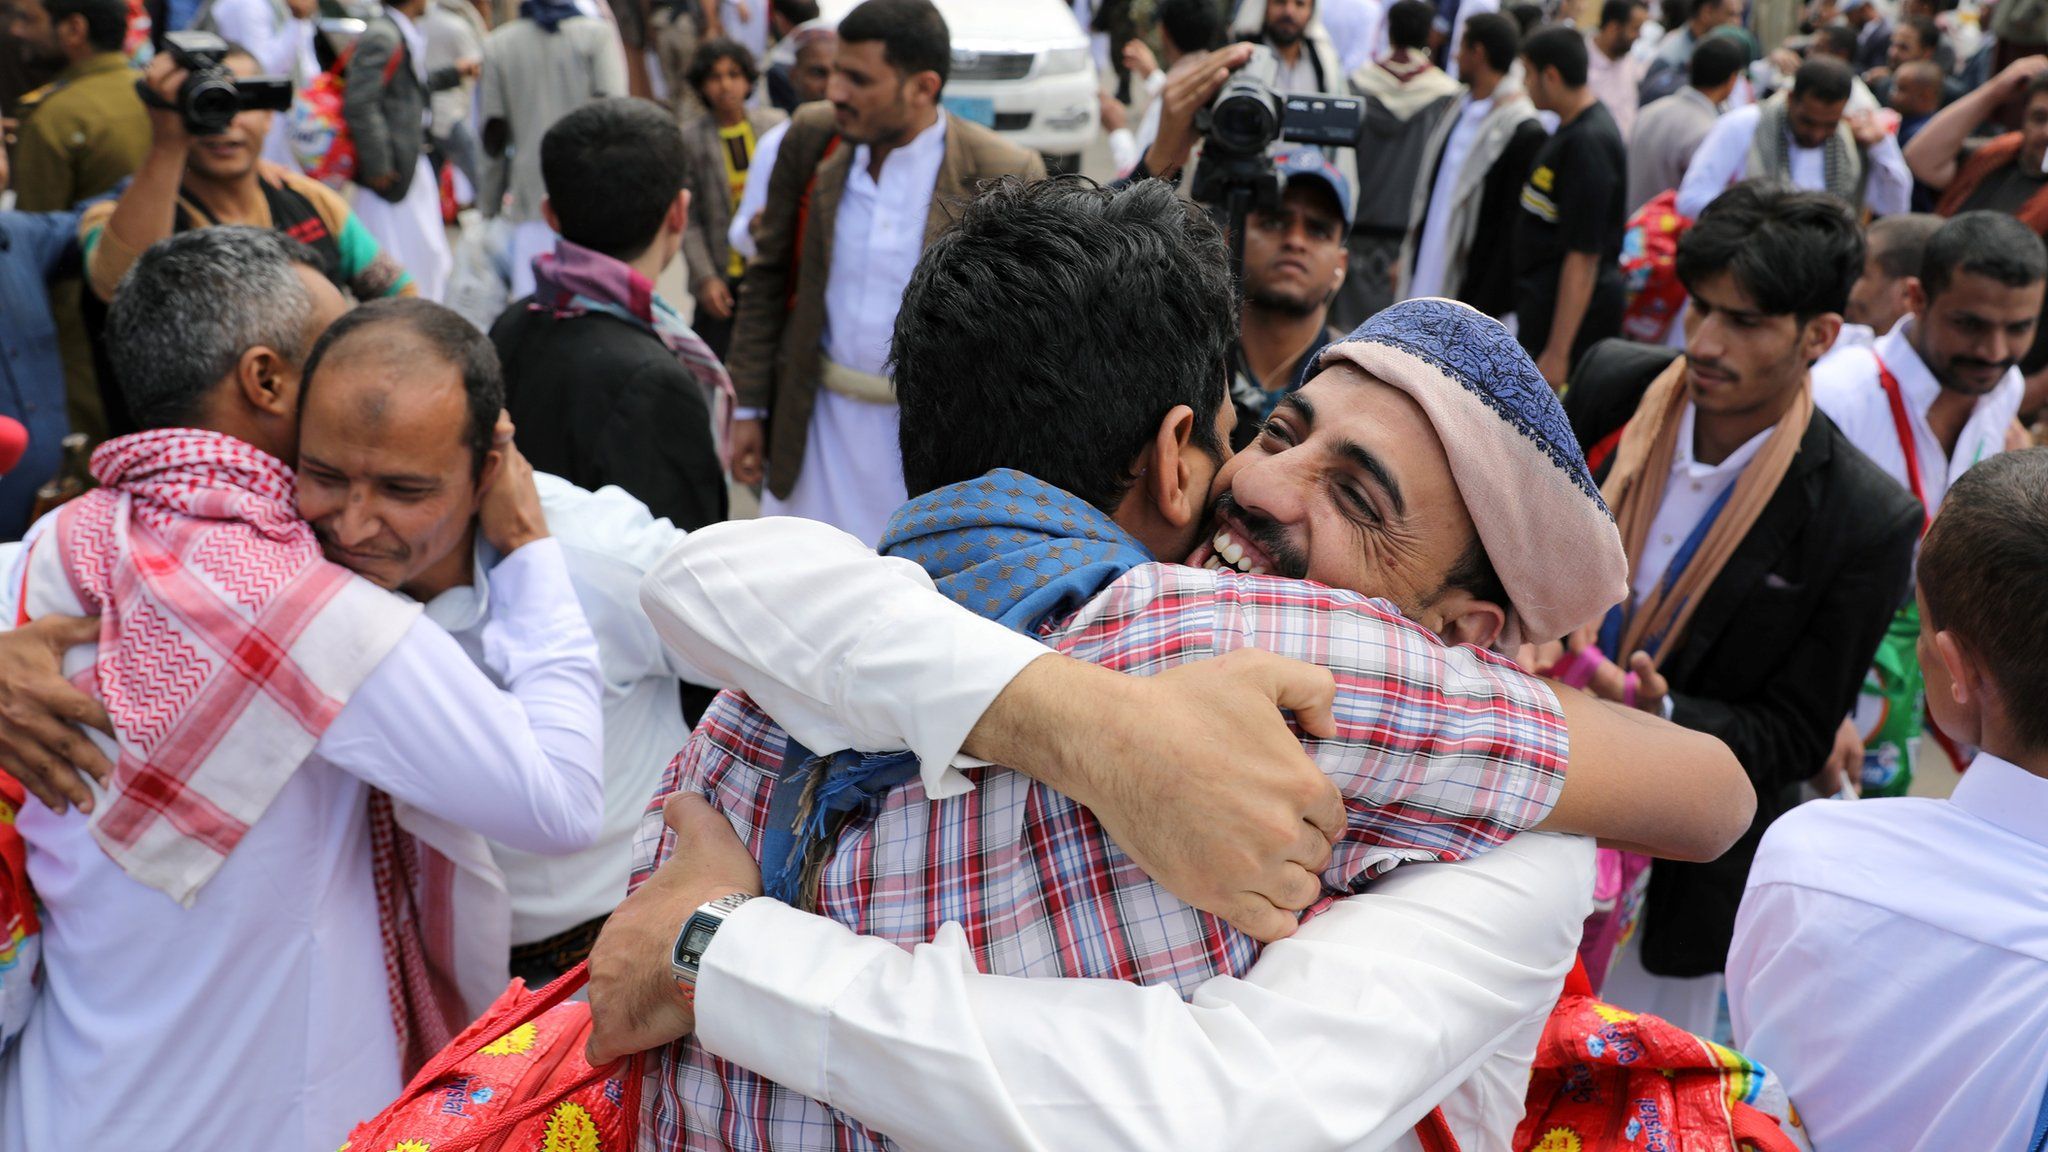 Yemeni detainees hug relatives after being released by the rebel Houthi movement in Sanaa (30 September 2019)